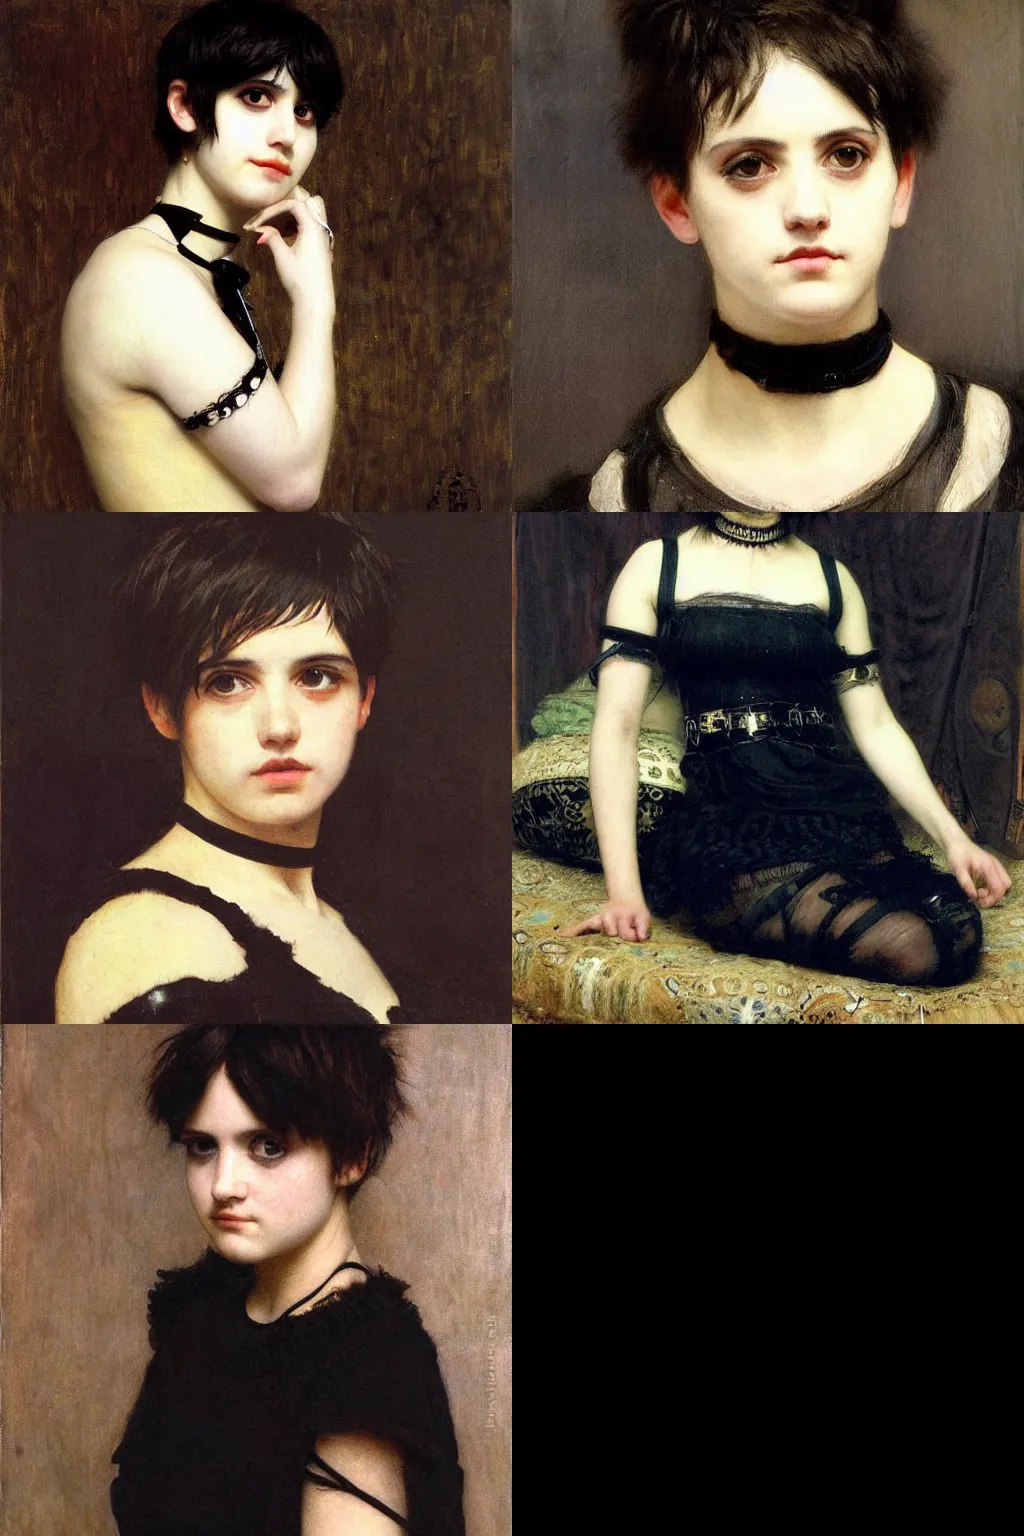 Prompt: an emo portrait by lawrence alma - tadema. her hair is dark brown and cut into a short, messy pixie cut. she has a slightly rounded face, with a pointed chin, large entirely - black eyes, and a small nose. she is wearing a black tank top, a black leather jacket, a black knee - length skirt, and a black choker..